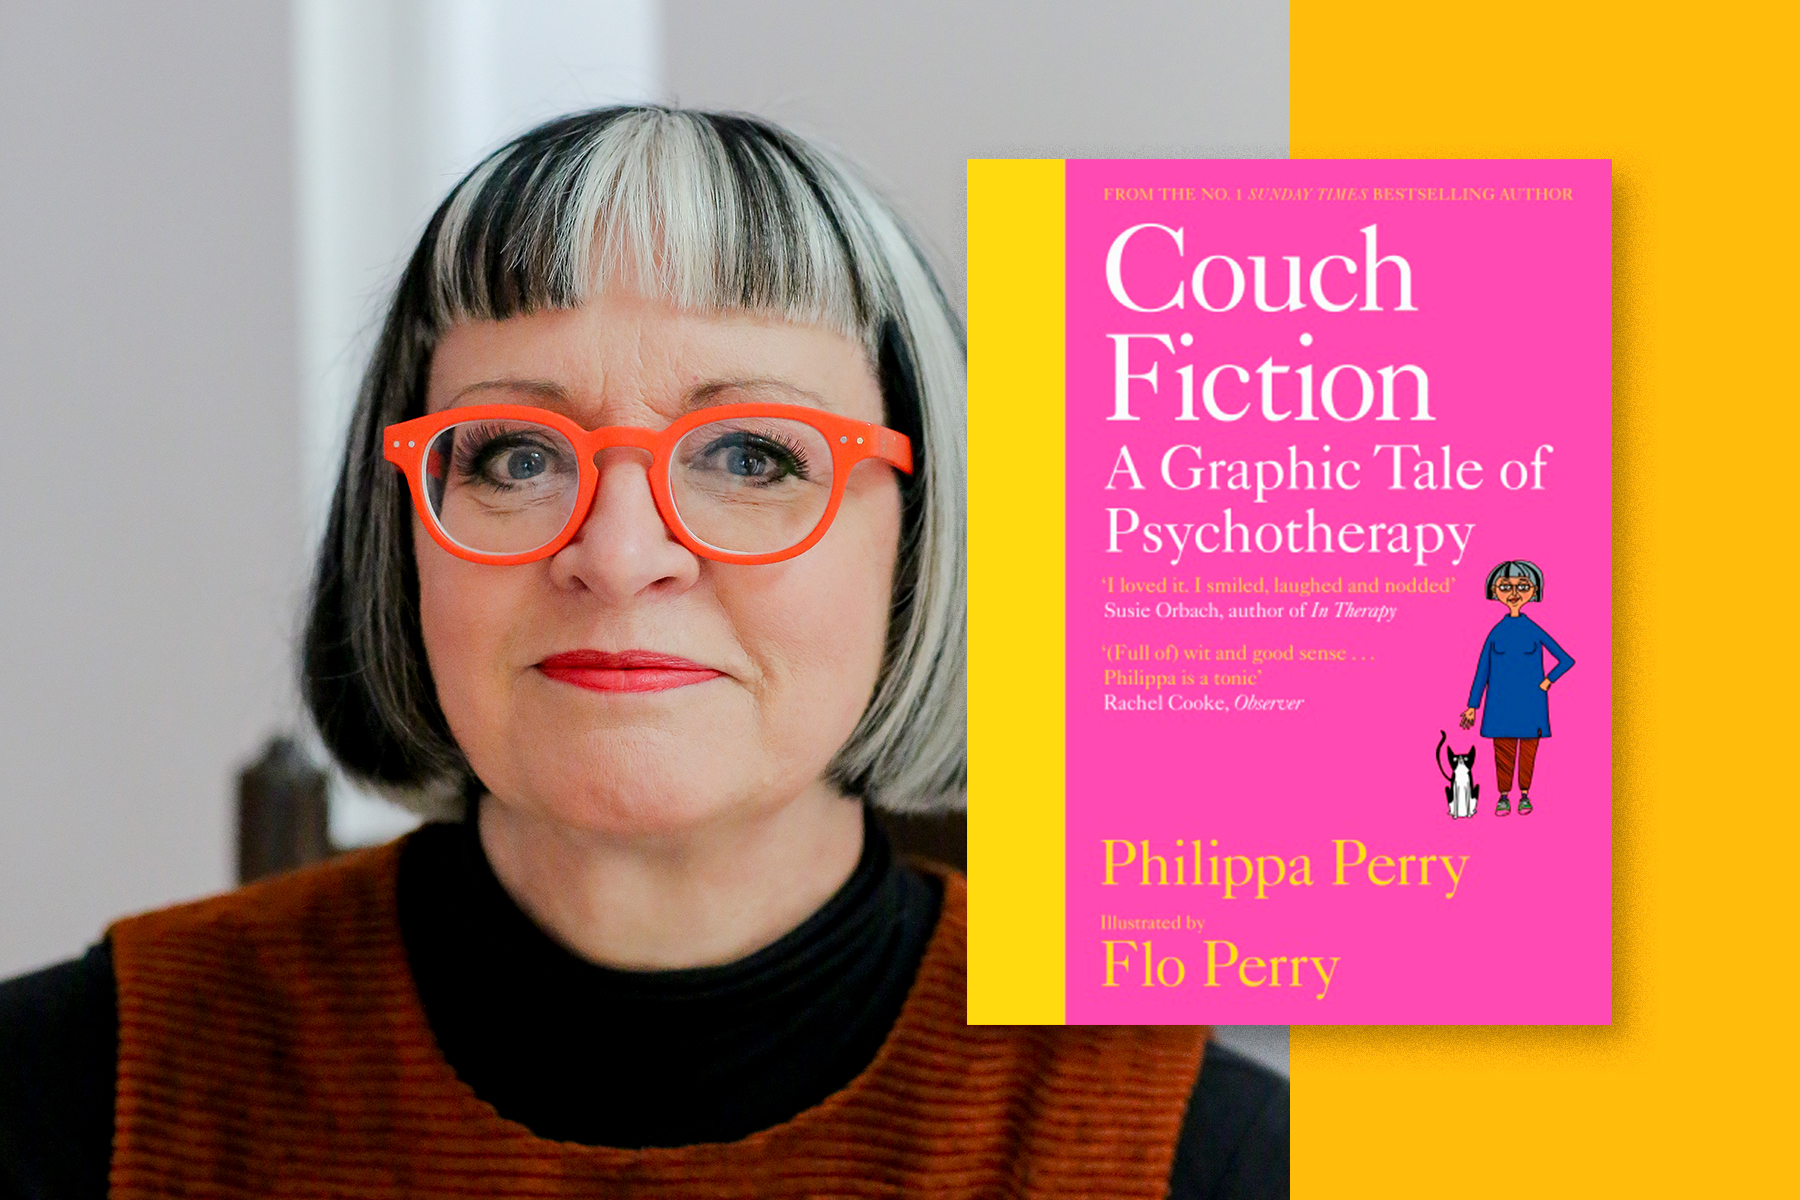 A photo of Philippa Perry wearing bright orange glasses frames. Photo: Justine Stoddart